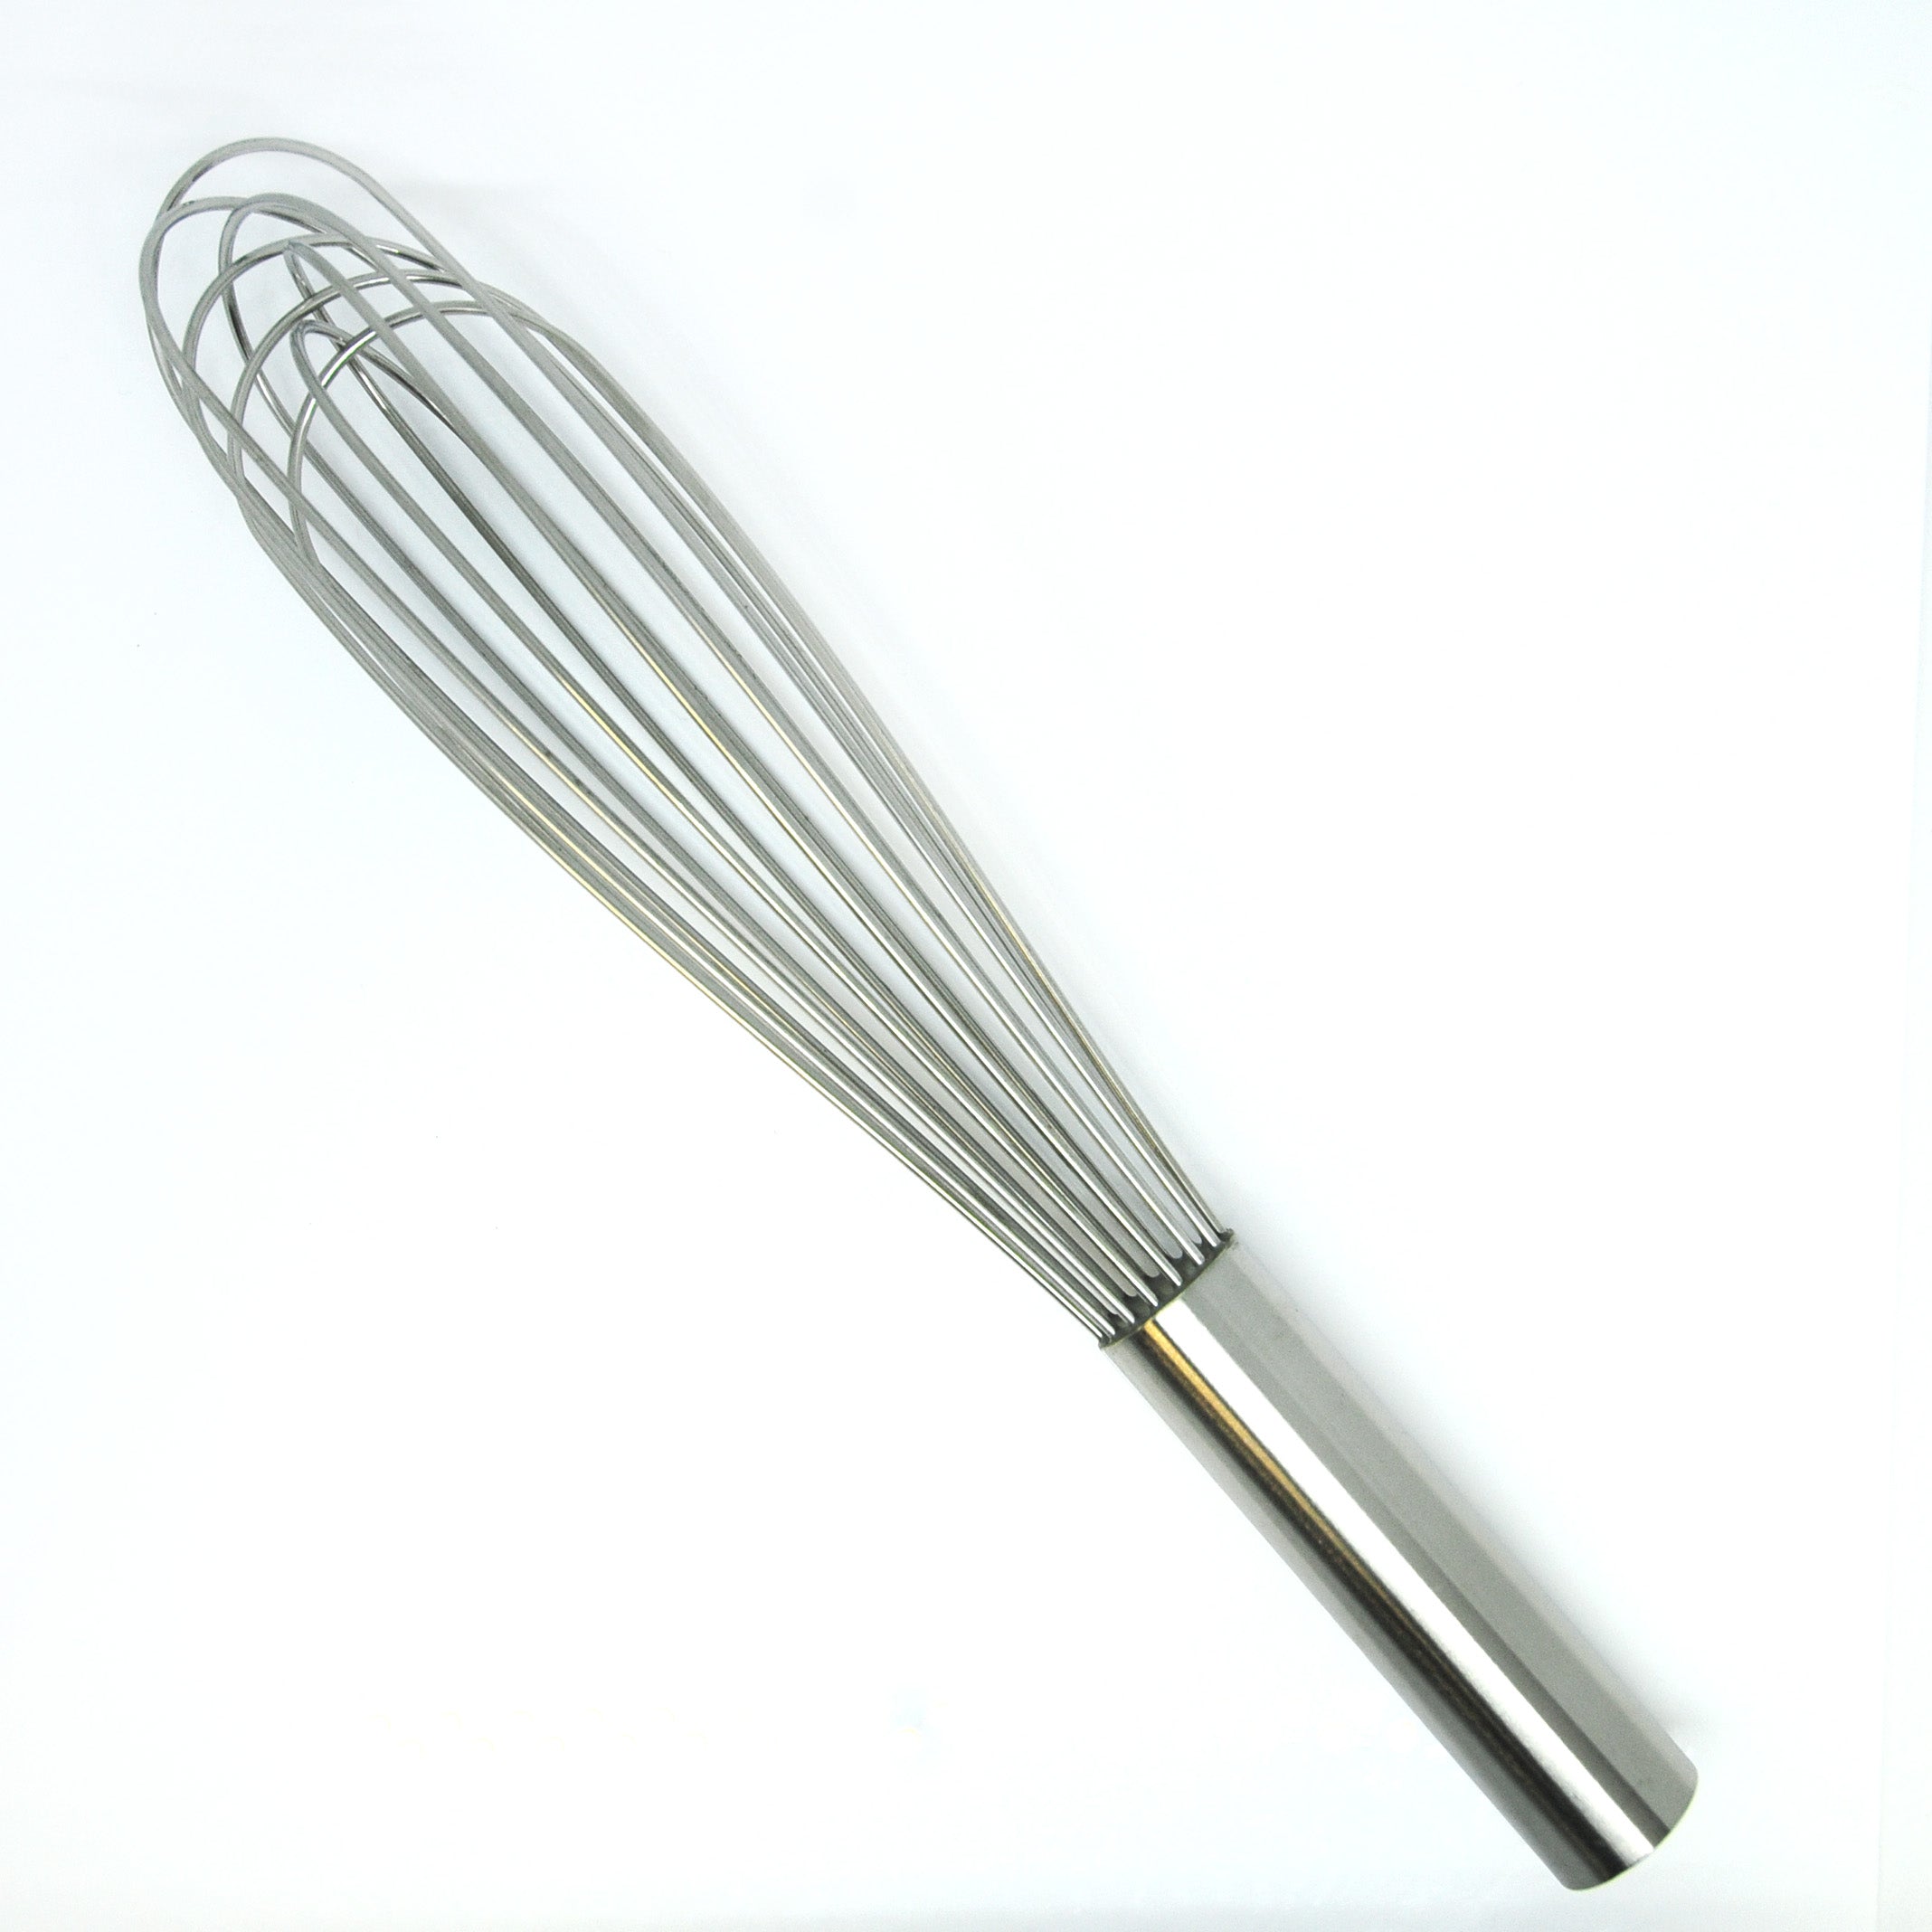 Aftosa Wire Whisks Wood Handle Whips